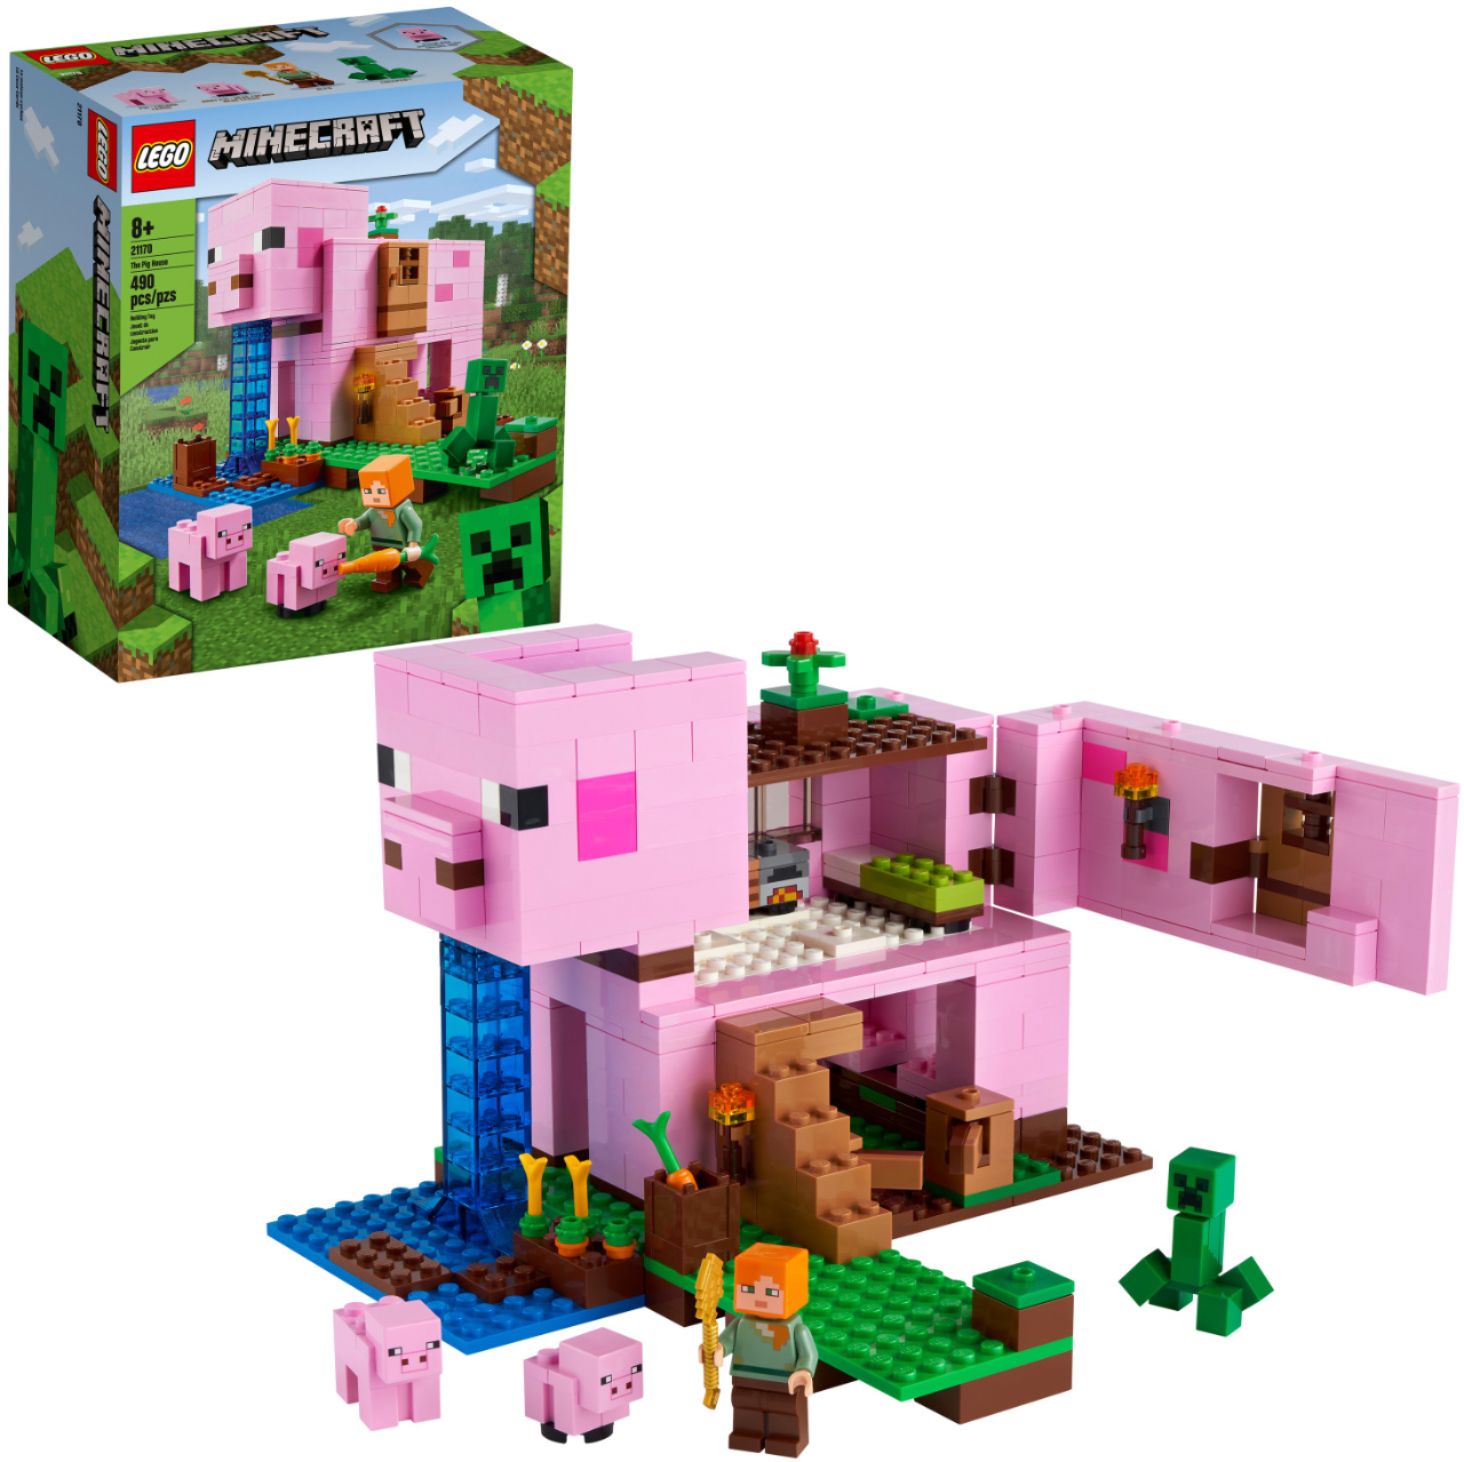 LEGO Minecraft The Pig House 21170 6332817 - Best Buy